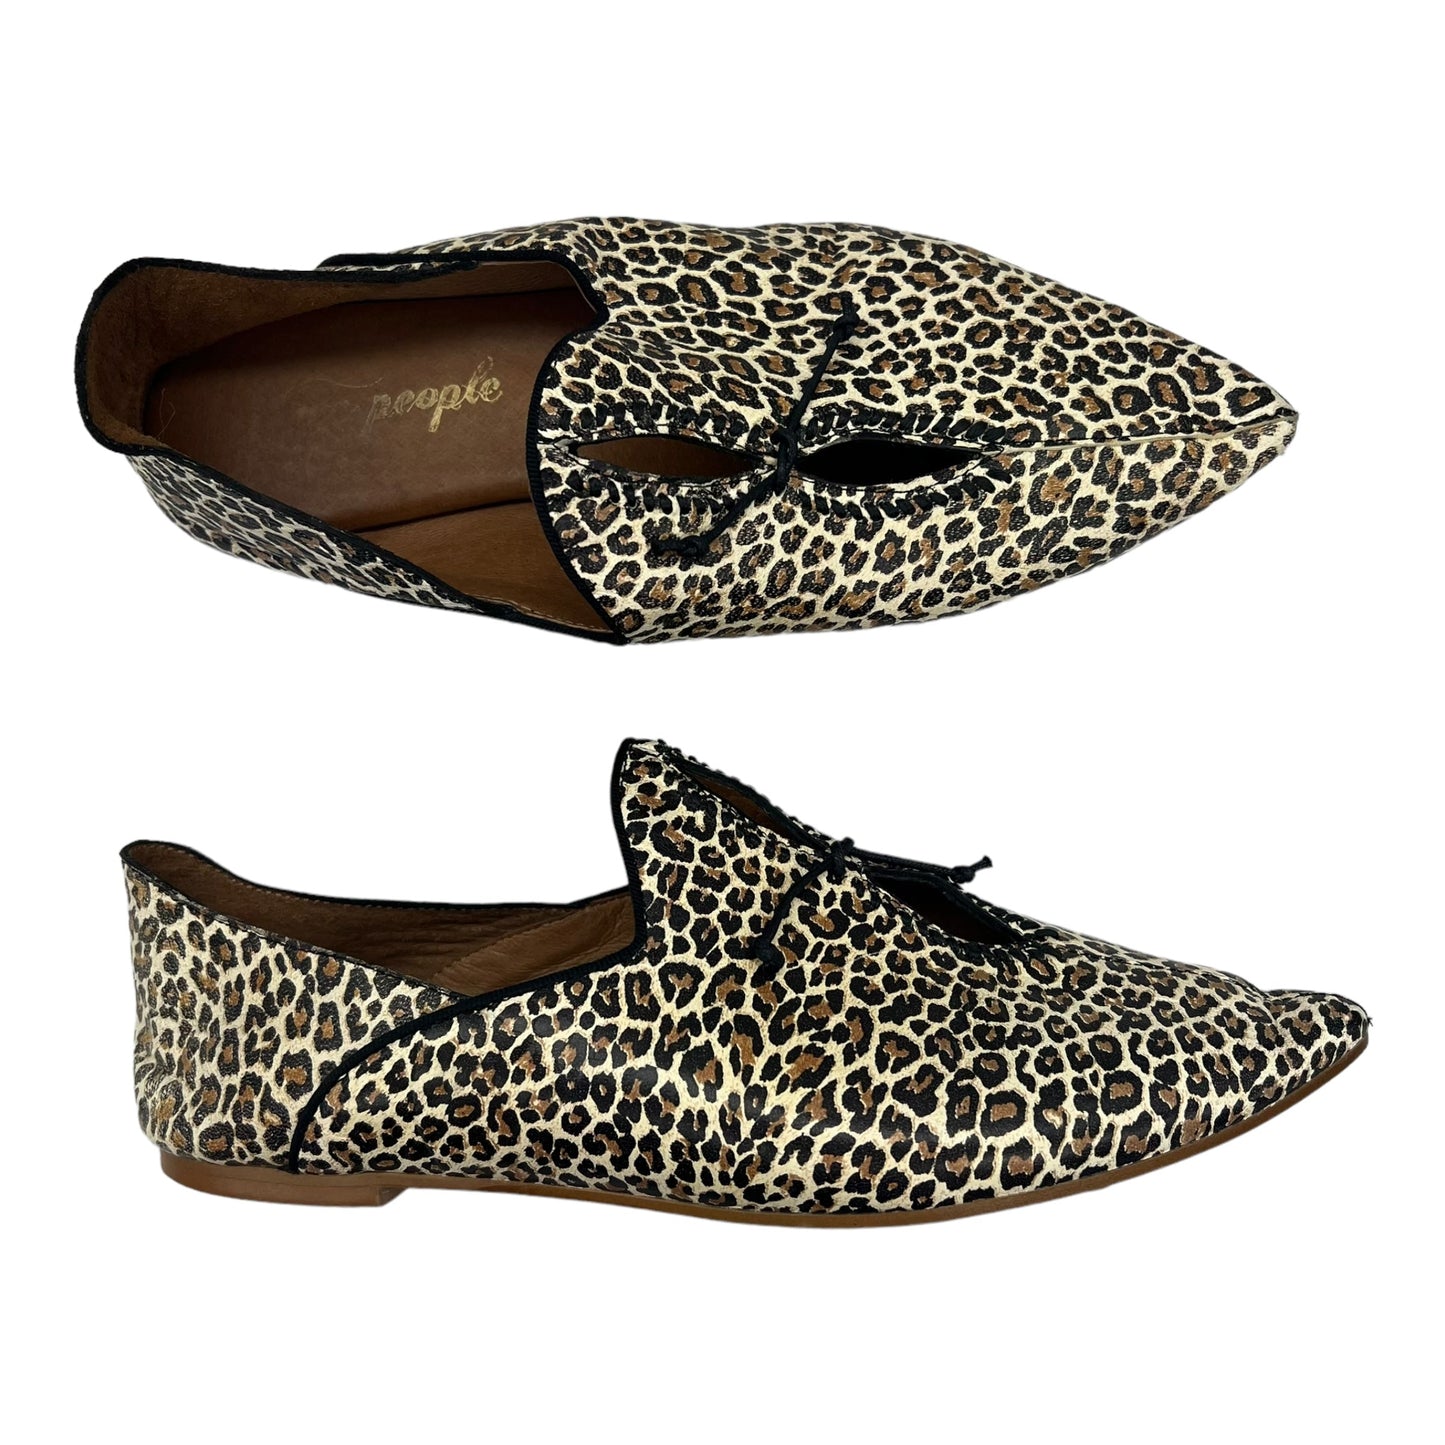 Animal Print Shoes Flats Free People, Size 7.5